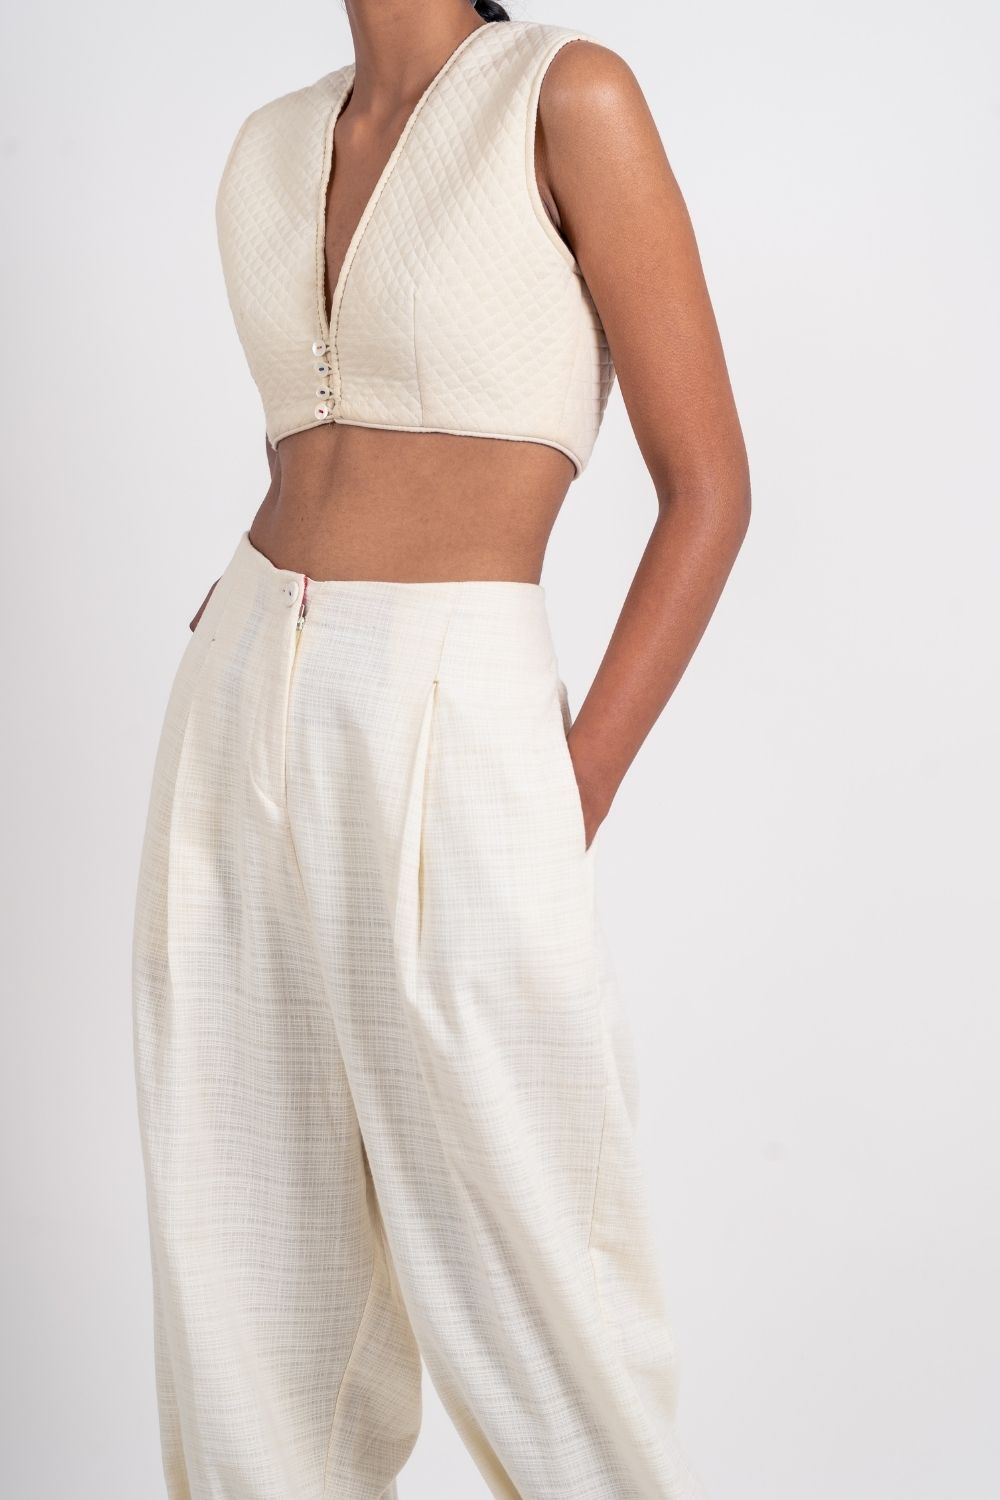 White Crop Top Tops Tops, Fitted At Bust, Handwoven cotton, Natural, Textured, Ahmev Kamakhyaa